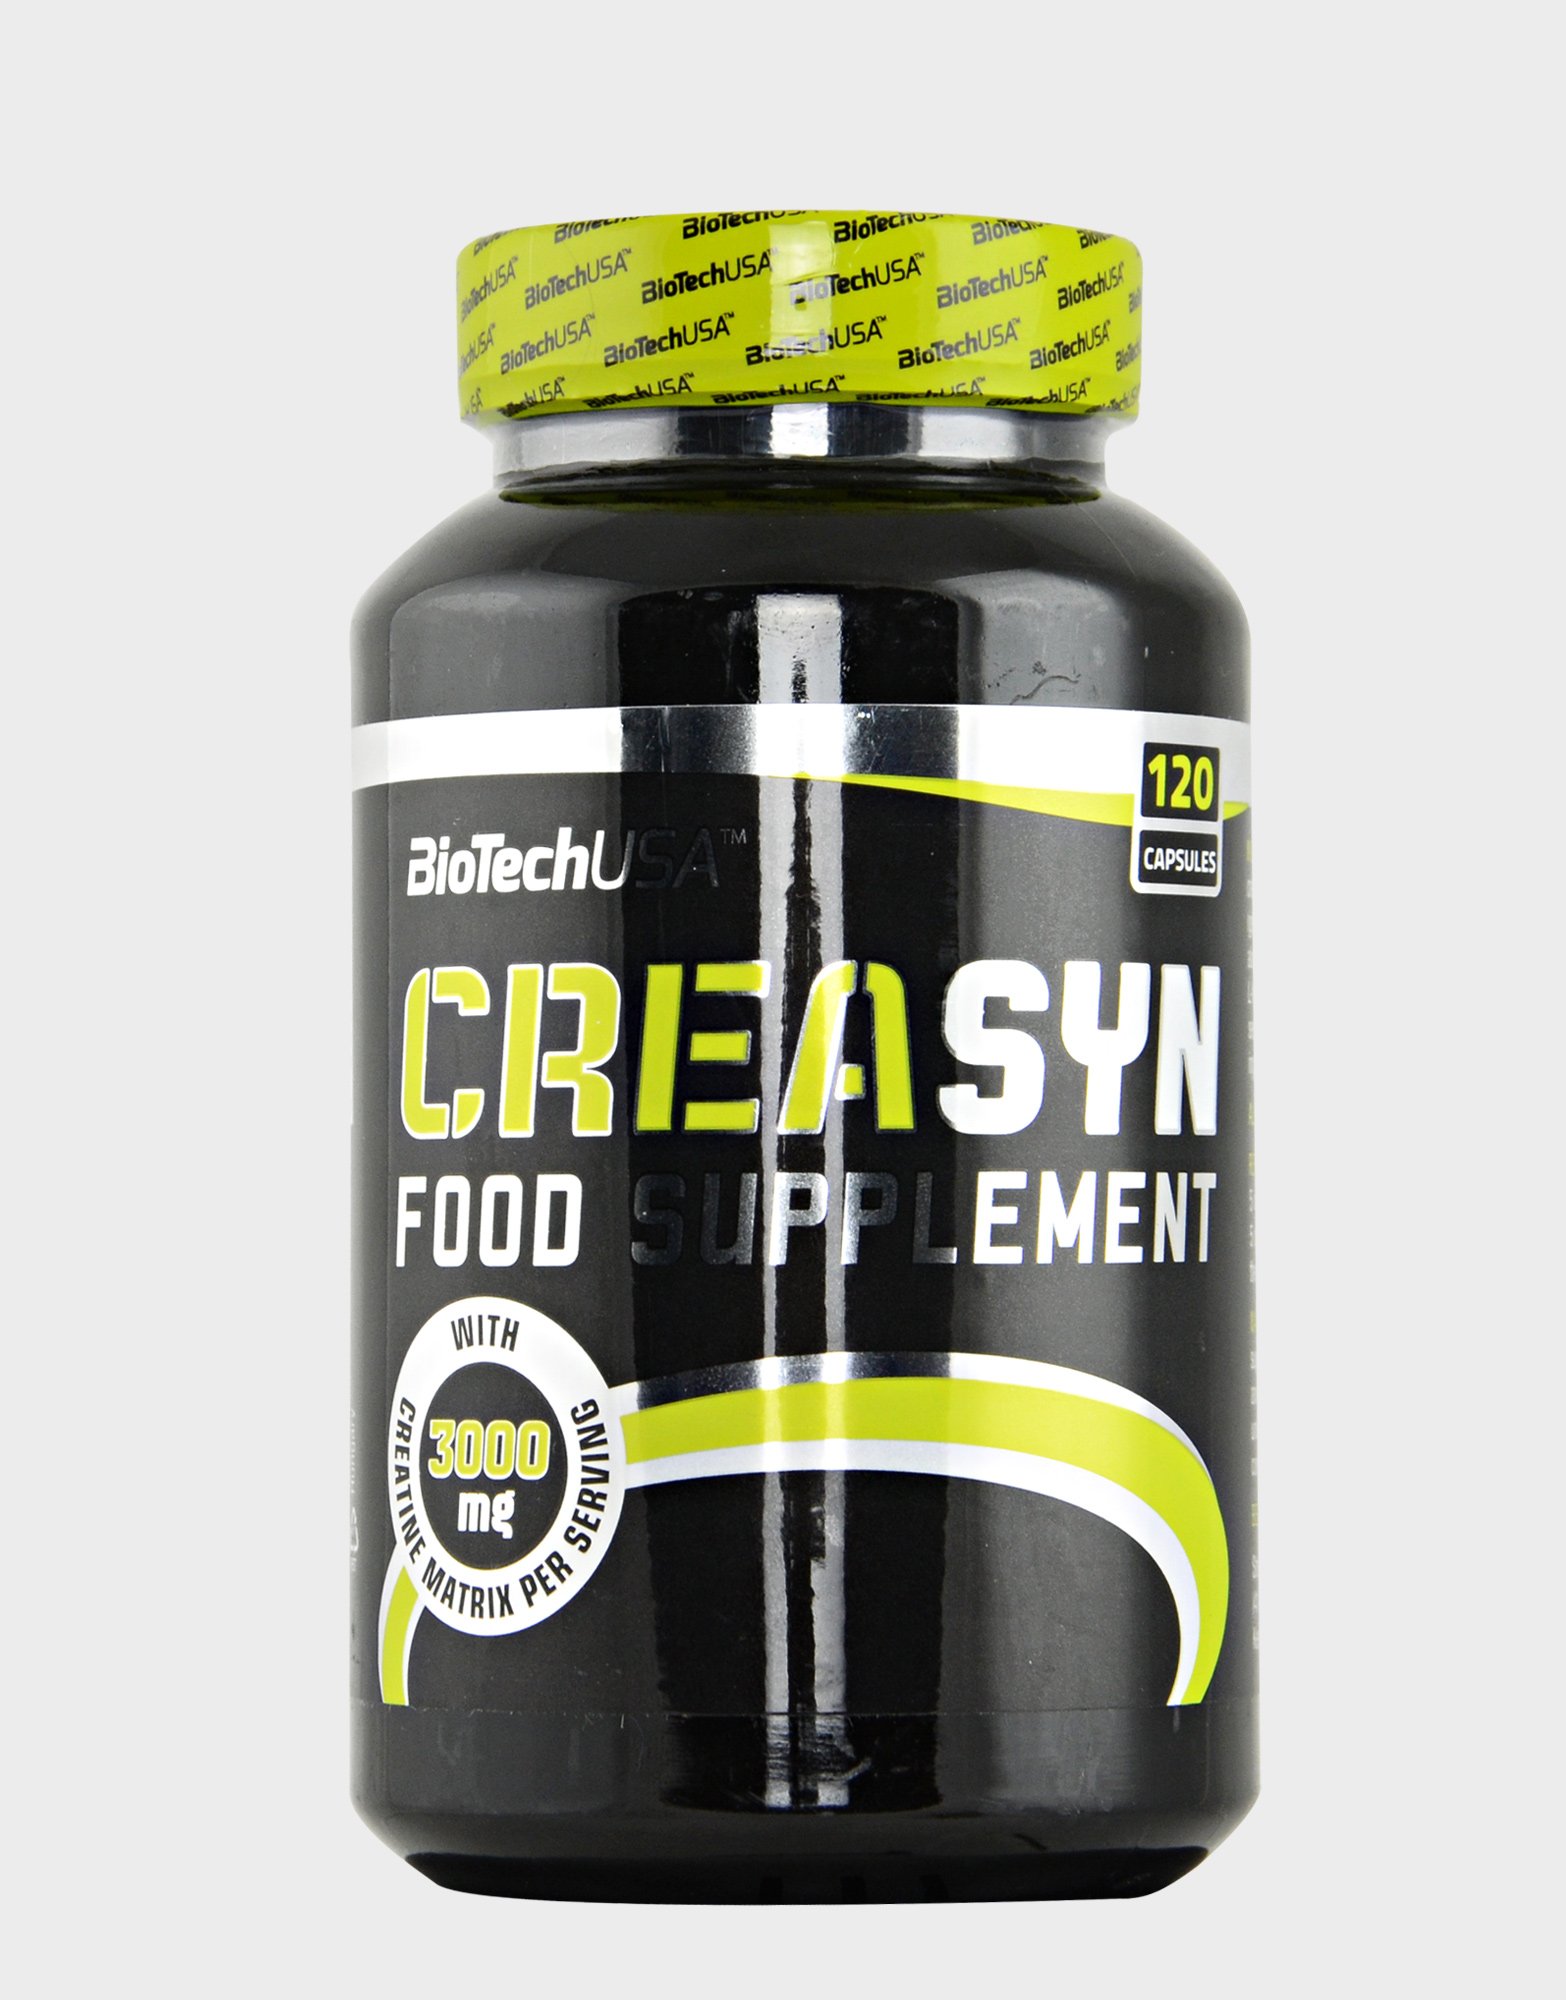 CreaSyn, 120 pcs, BioTech. Different forms of creatine. 